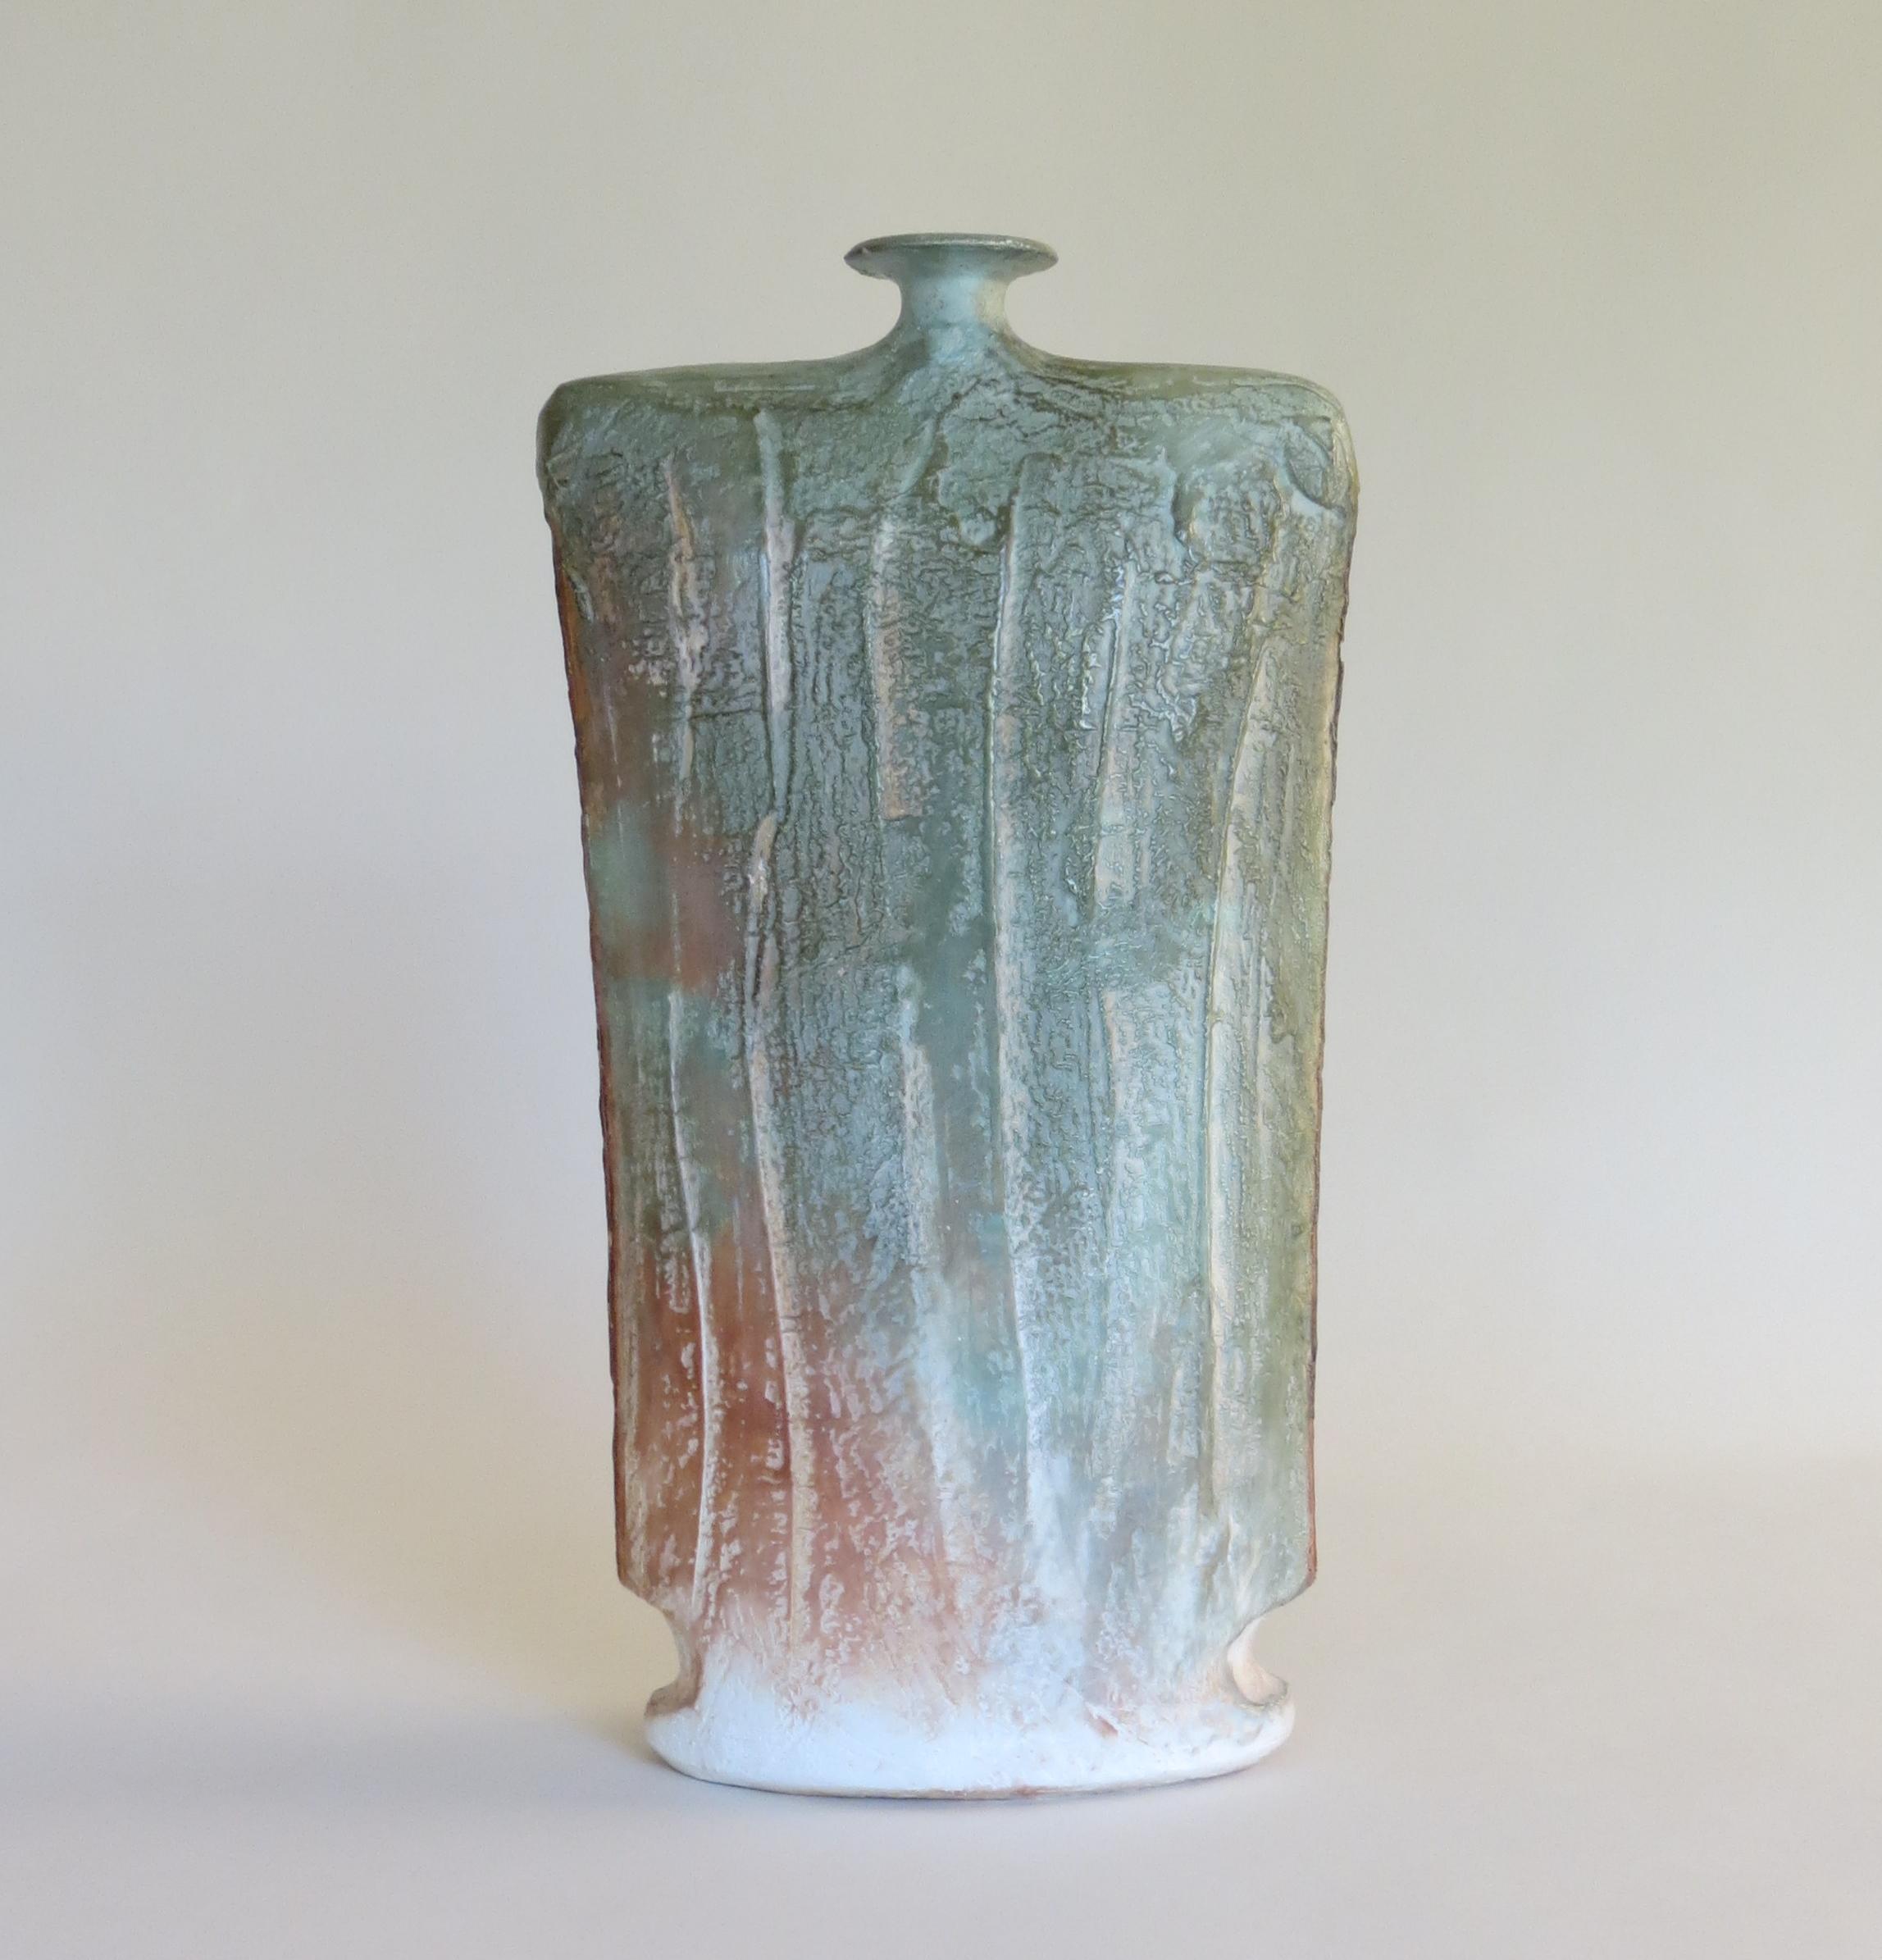 Handmade slab studio pottery vase in good condition.  This piece dates from the 1980s and is signed by the artist John Bedding who is based in St Ives.

In very good condition.